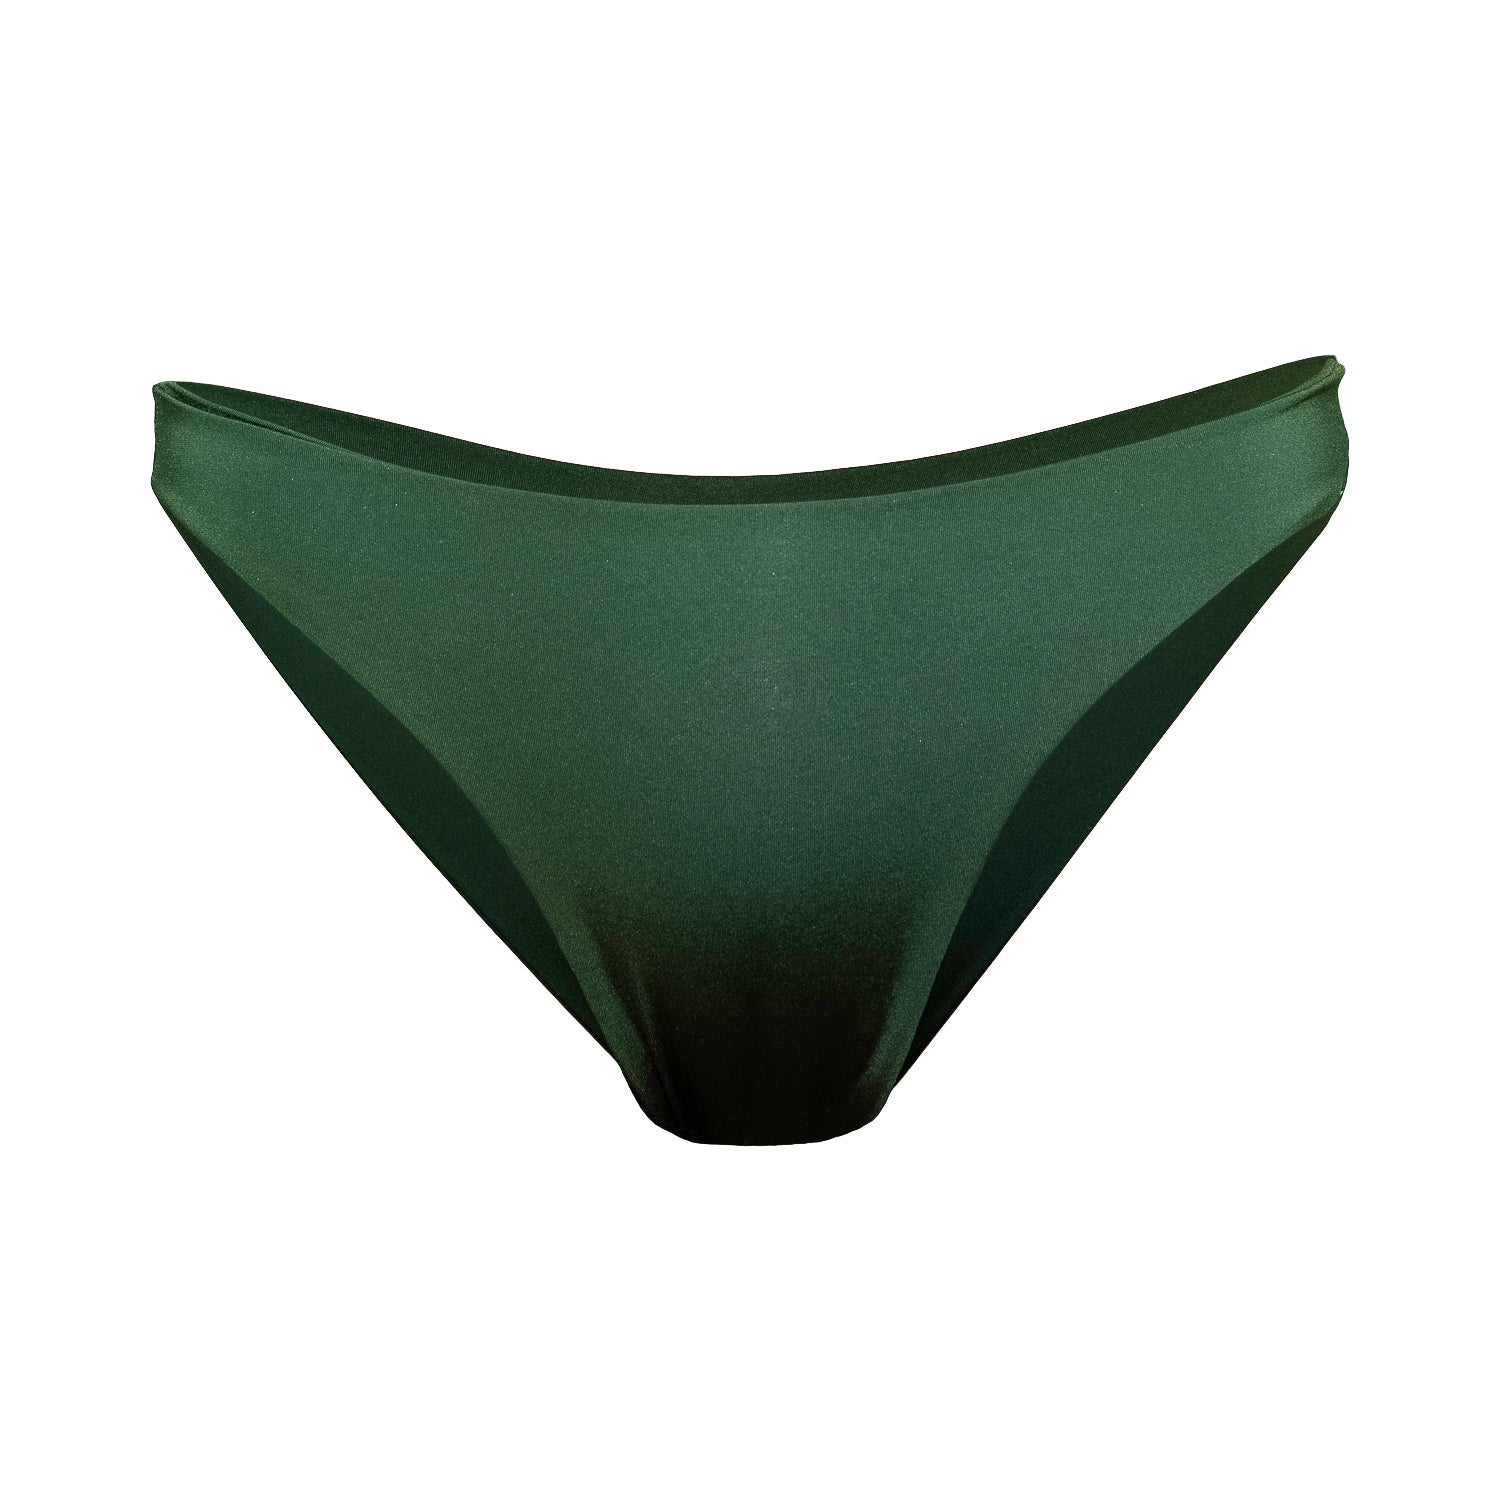 Classic green bikini bottoms with an extra soft touch, fine lining and thick feel. Made sustainably and ethically in Europe from finest polyamide. Perfected fit for every body shape.